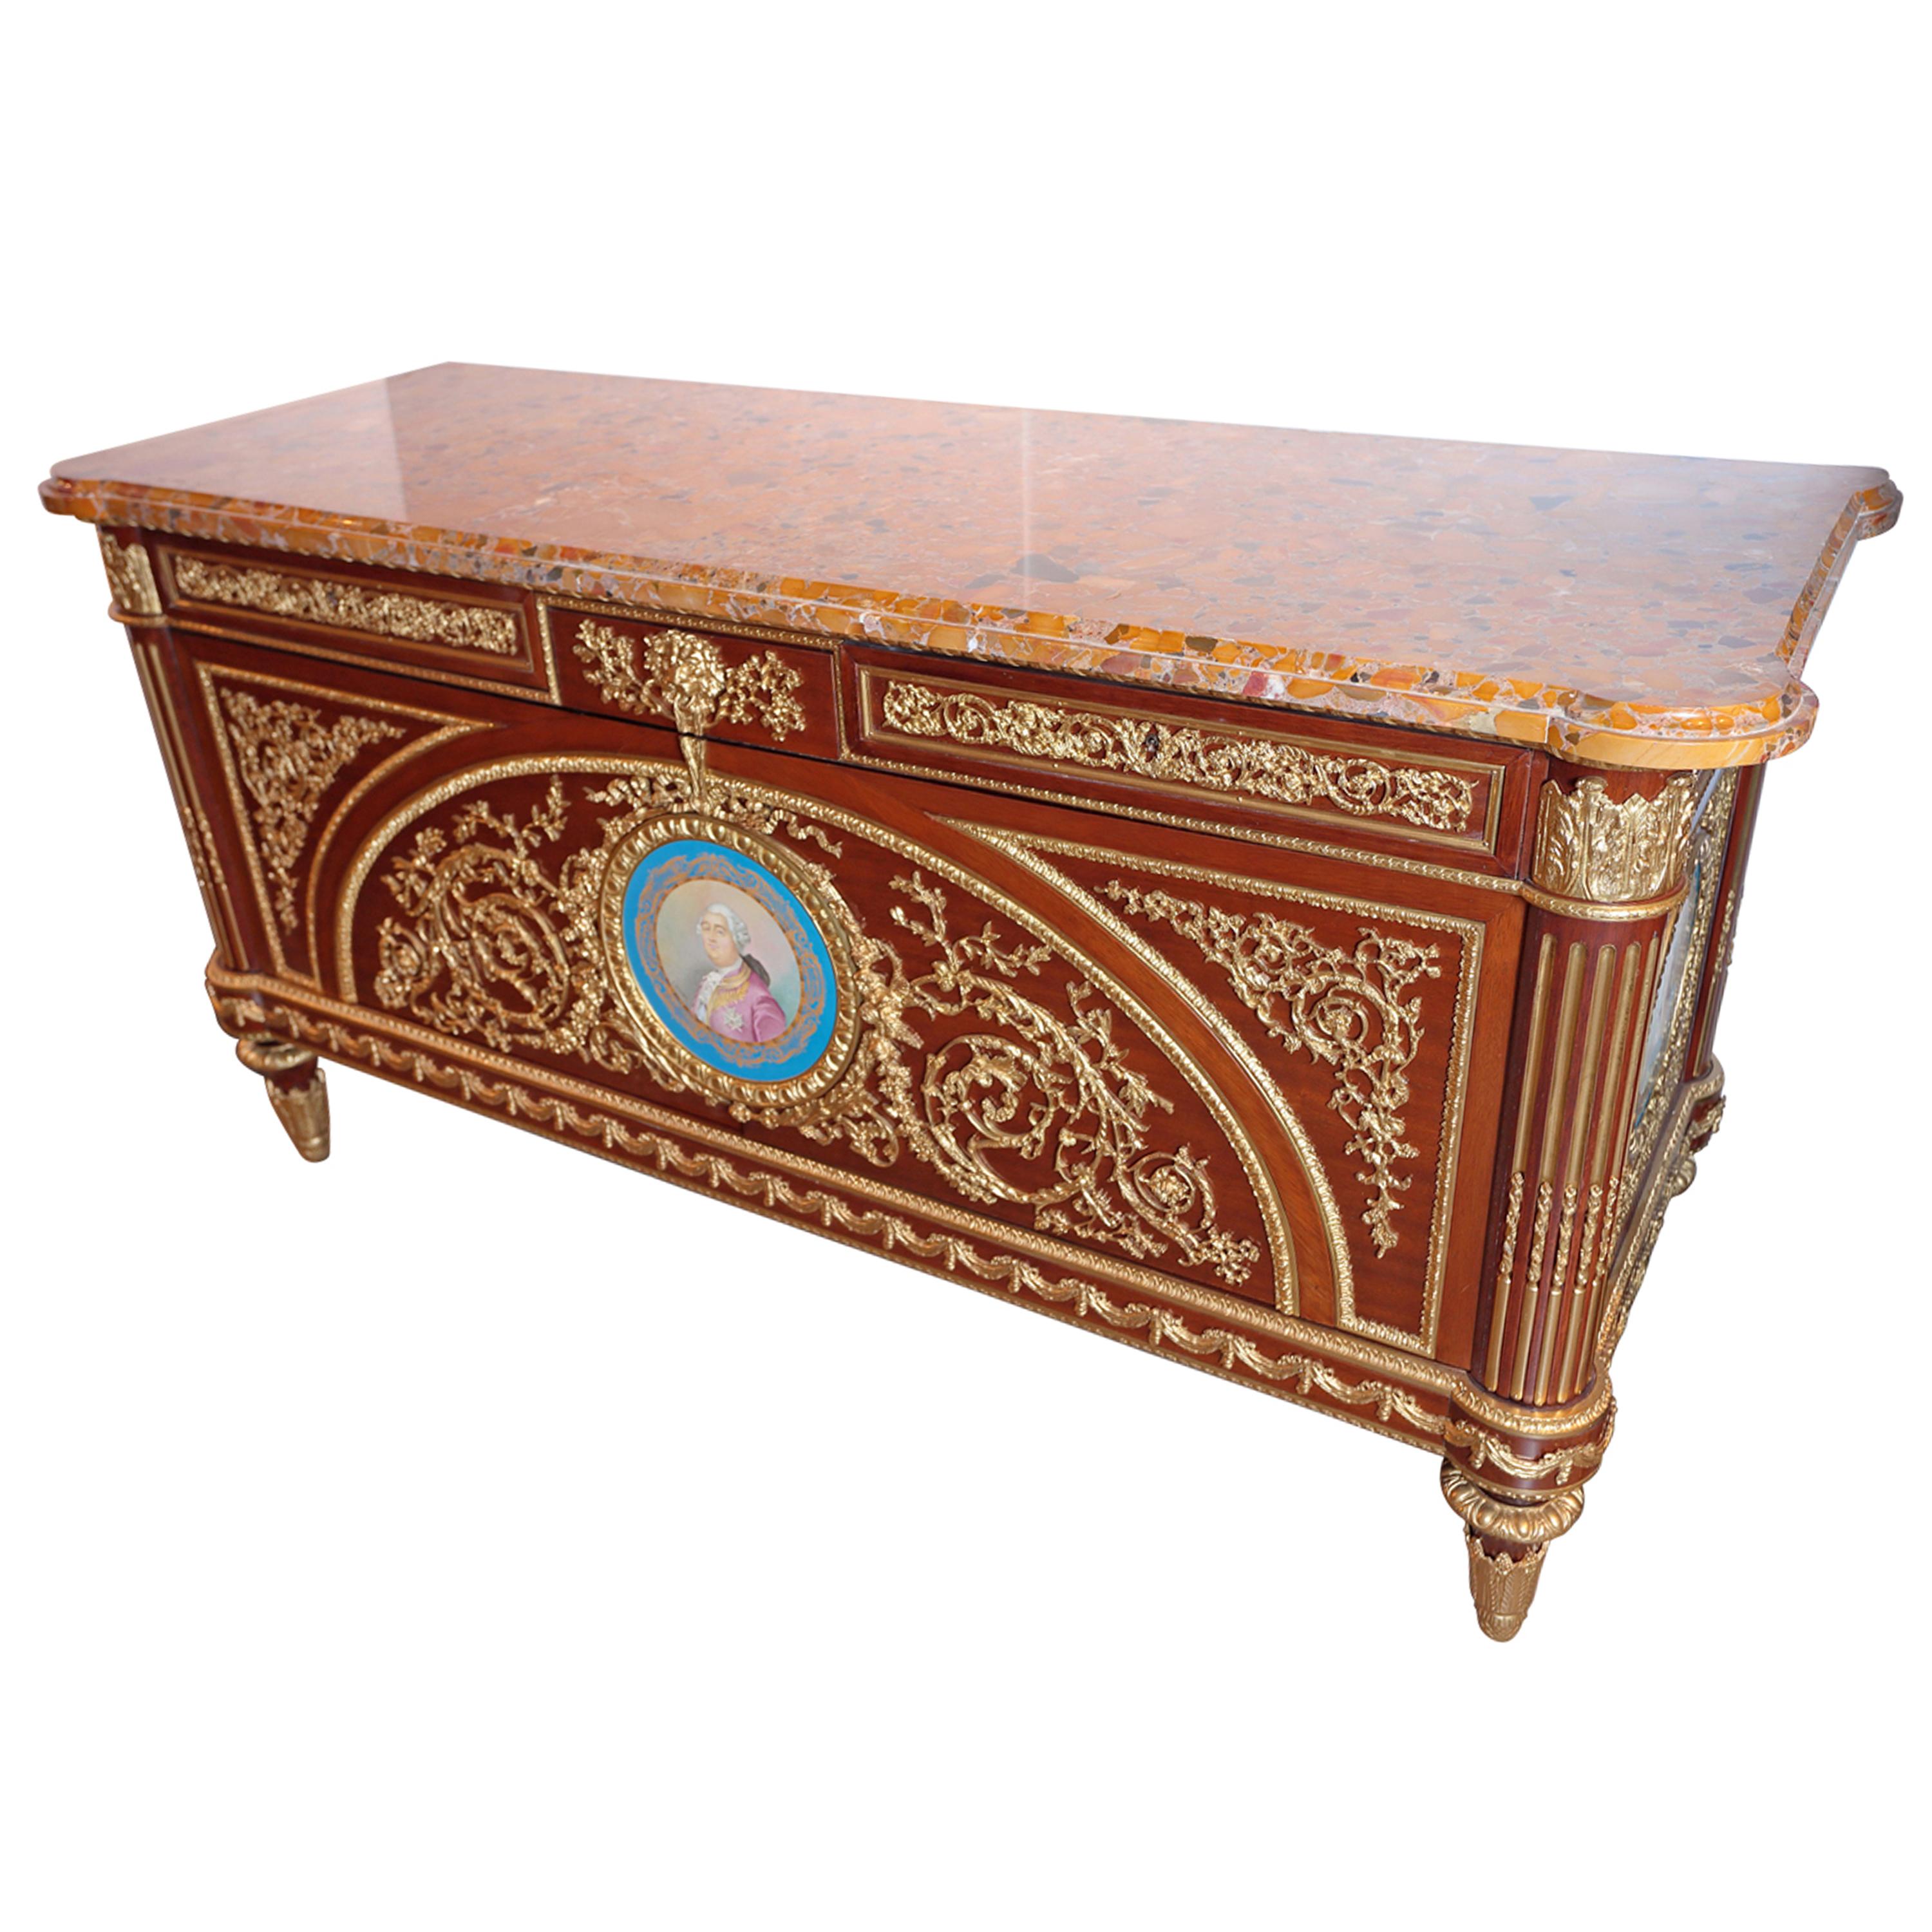 19th Century French Belle Epoque Period Mahogany and Sèvres Porcelain Commode